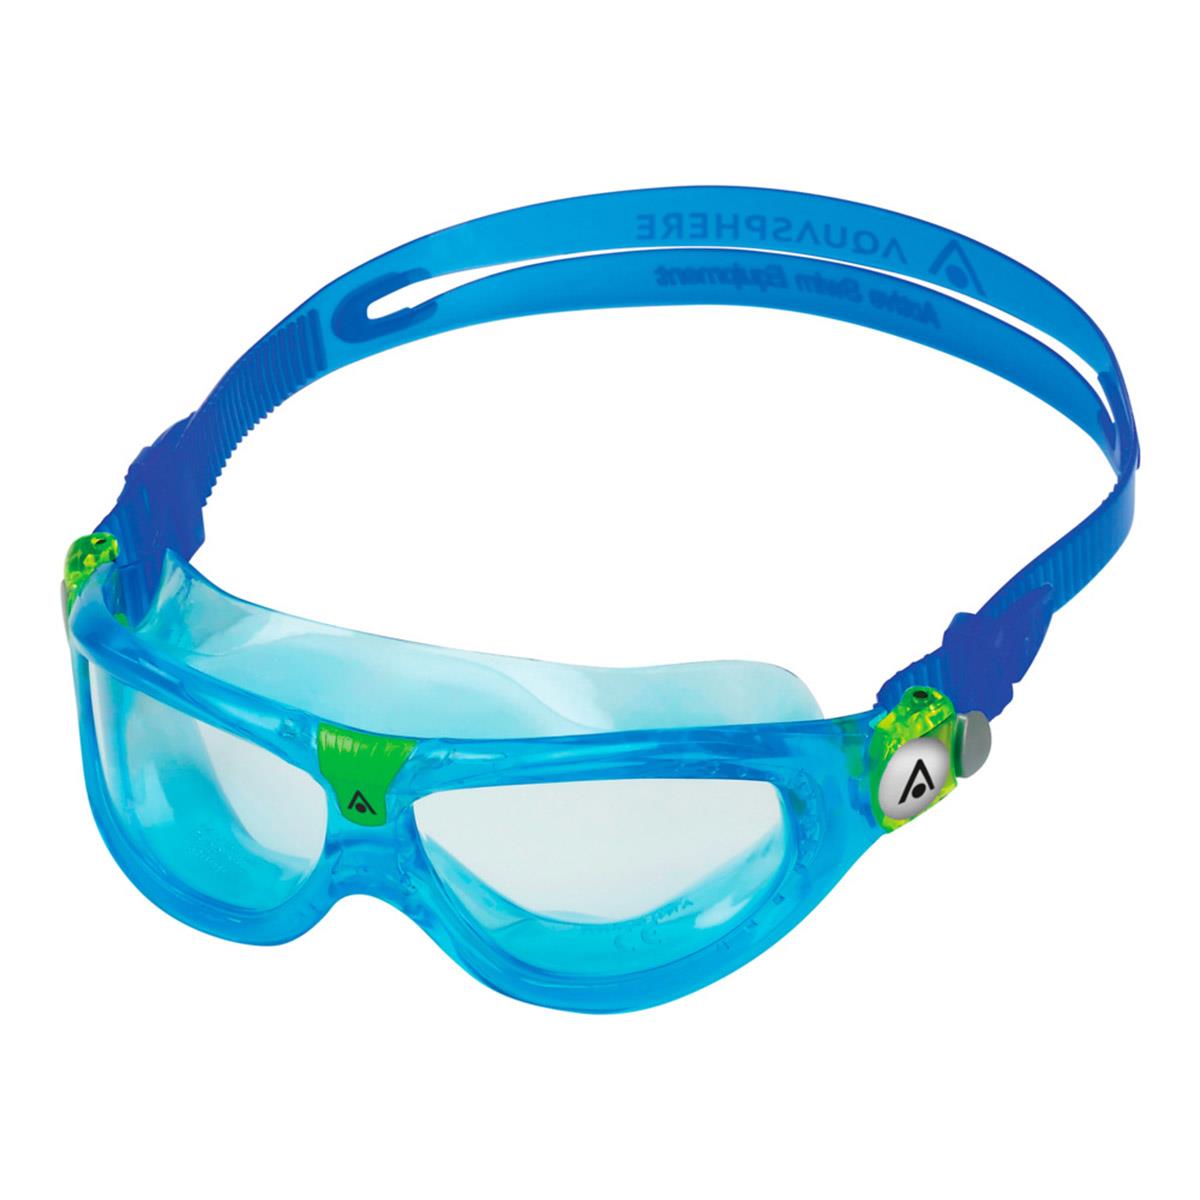 Aquasphere Seal Kid 2 Clear Lens Goggles - Turquoise/ Blue